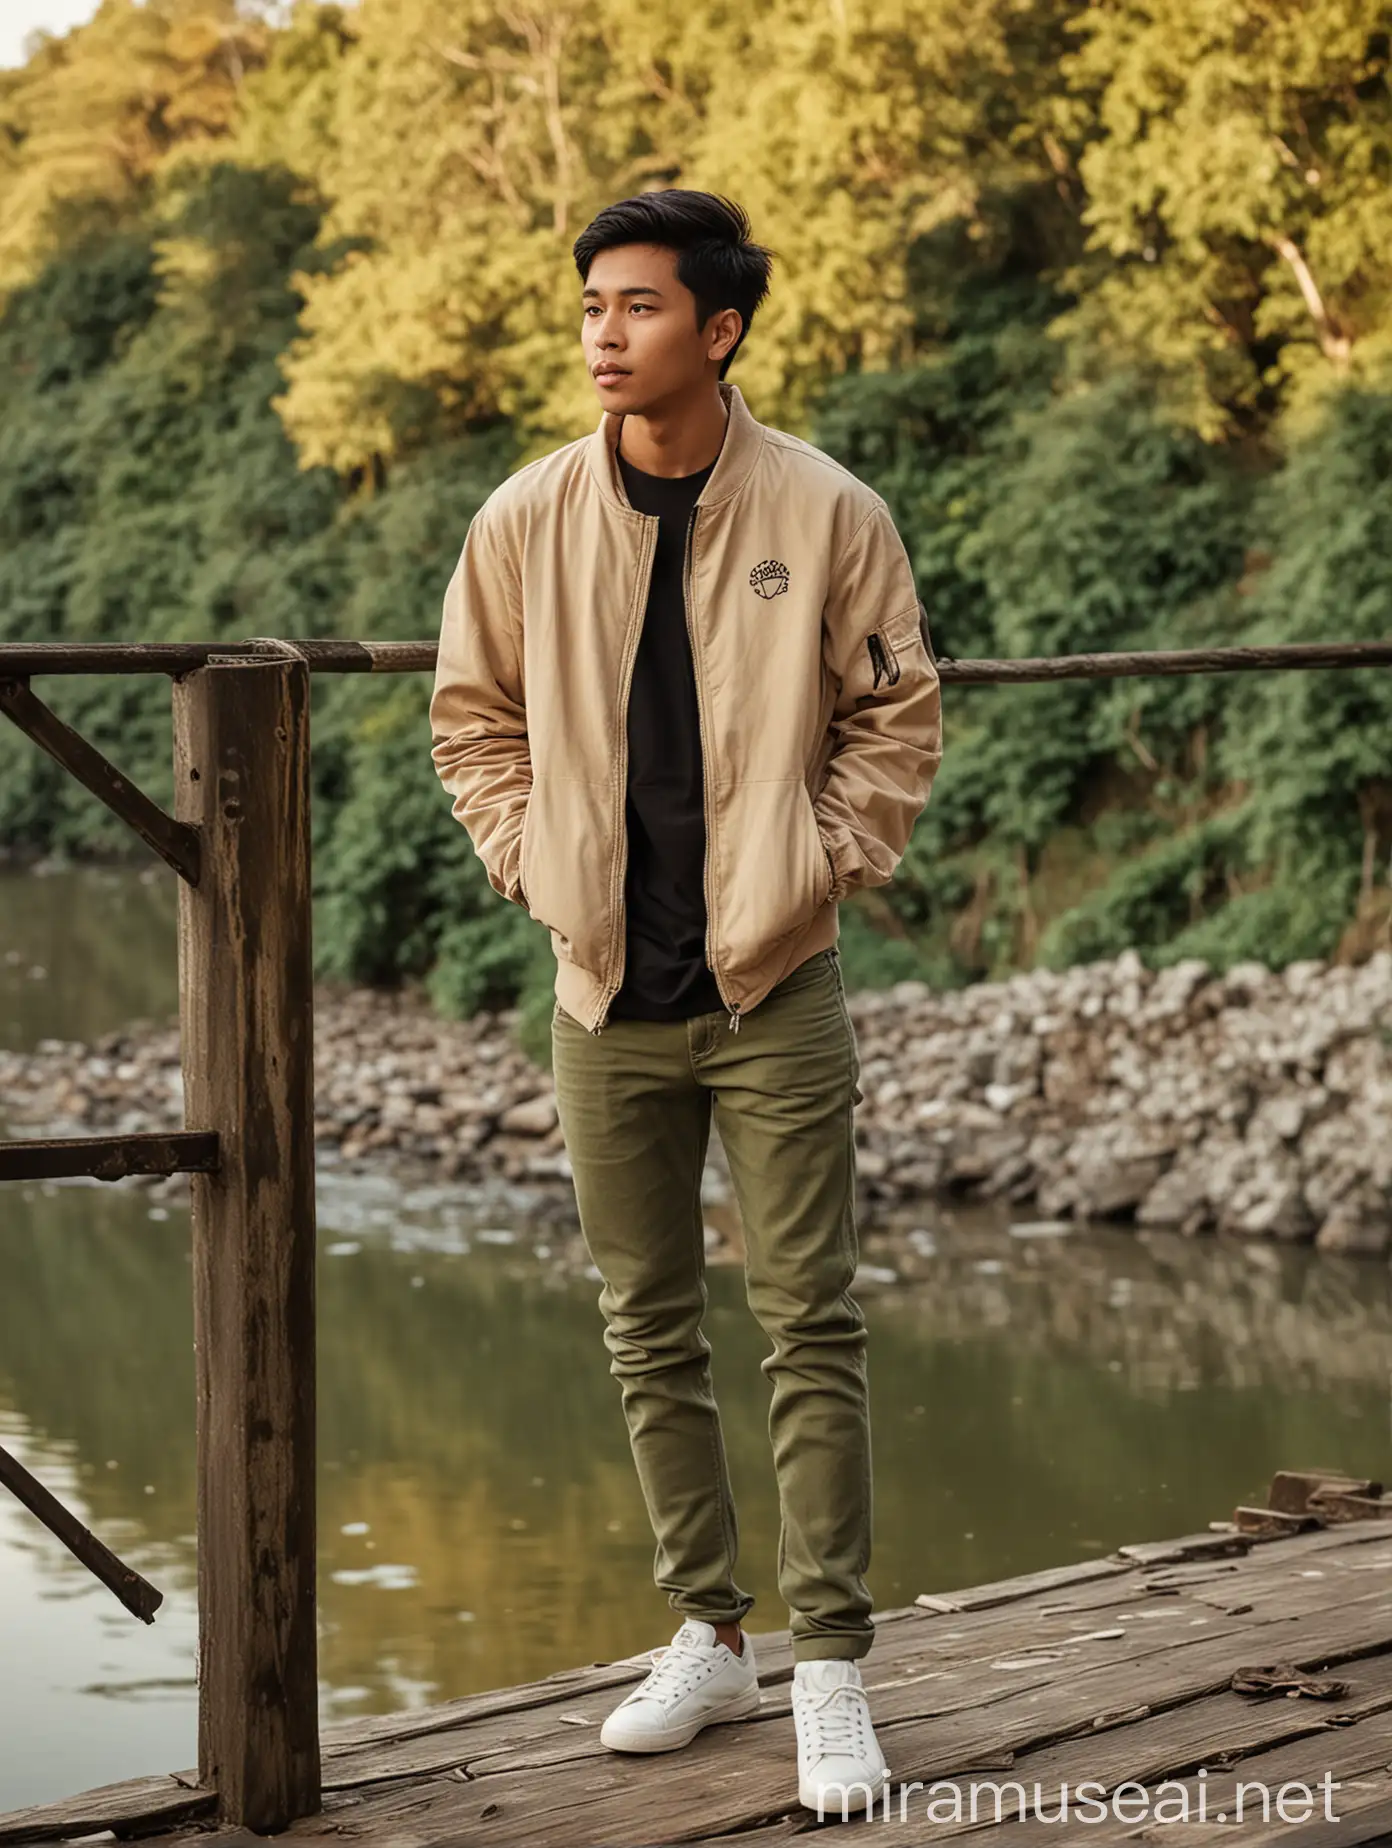  of a slim Indonesian man around 20 years old with short black comma hair  wearing a light brown zipper jacket with 'ISRA' logo, cream jeans, and sneakers, standing on an old bridge over a river in the late afternoon, leaning against a bridge pillar, with a beautiful and cool green hilly background, in raw style. Add details such as a gentle sunset with warmer lighting to enhance the mood. Make the man's pose more dynamic.